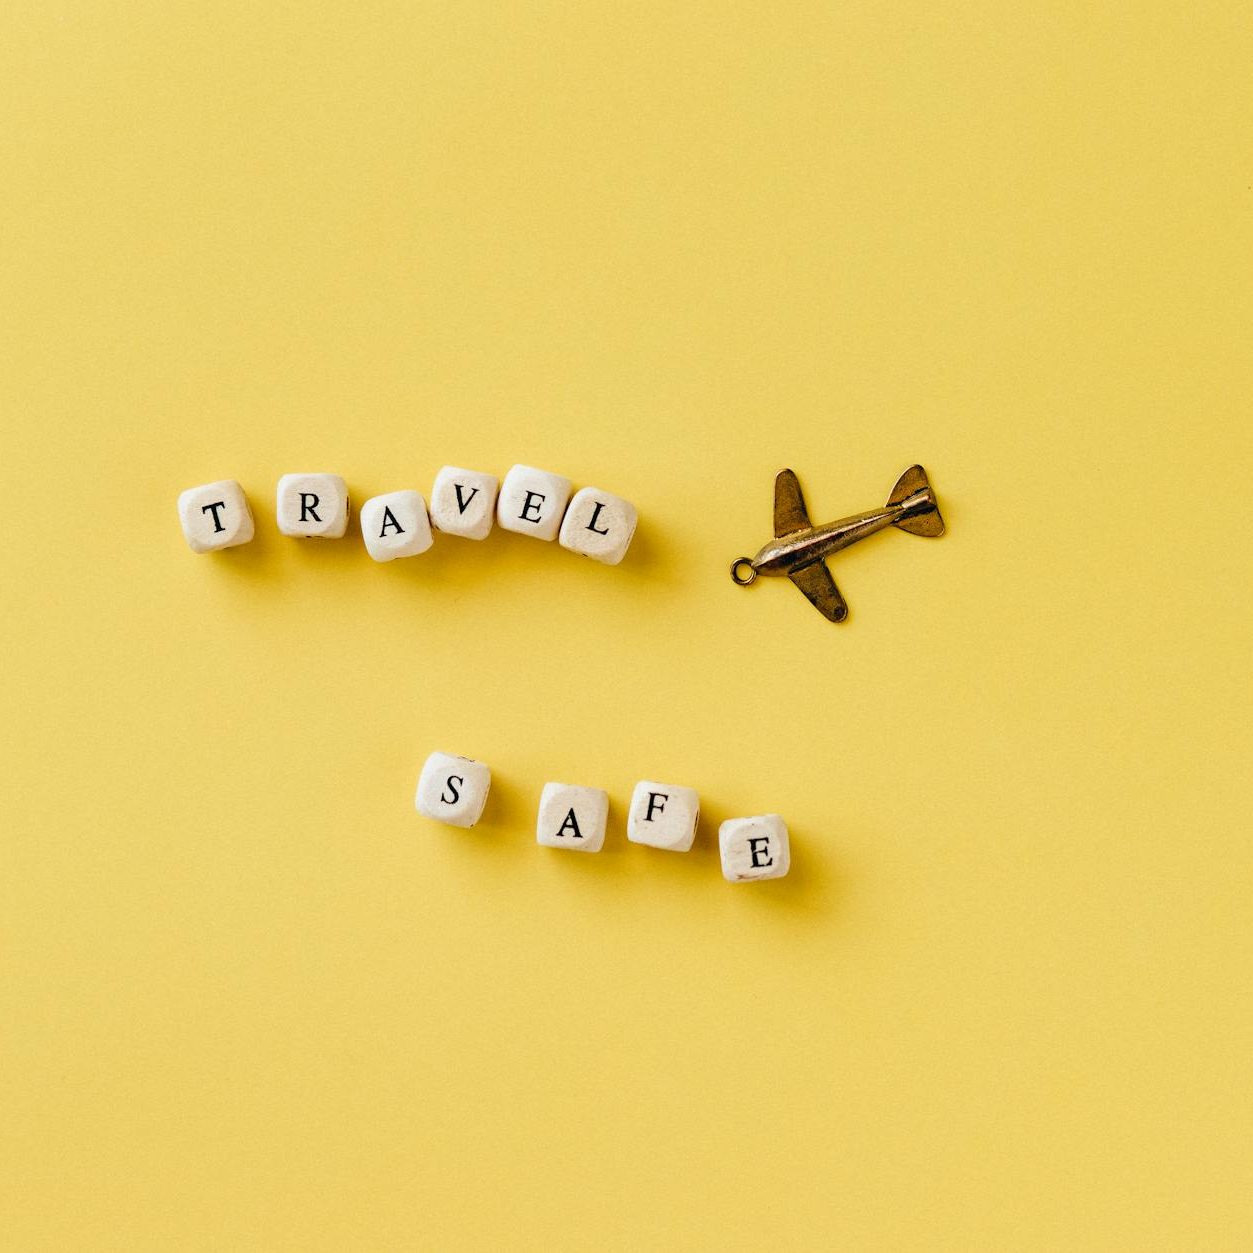 beads with letters arranged in a text saying travel safe and a small pendant in a shape of an airplane